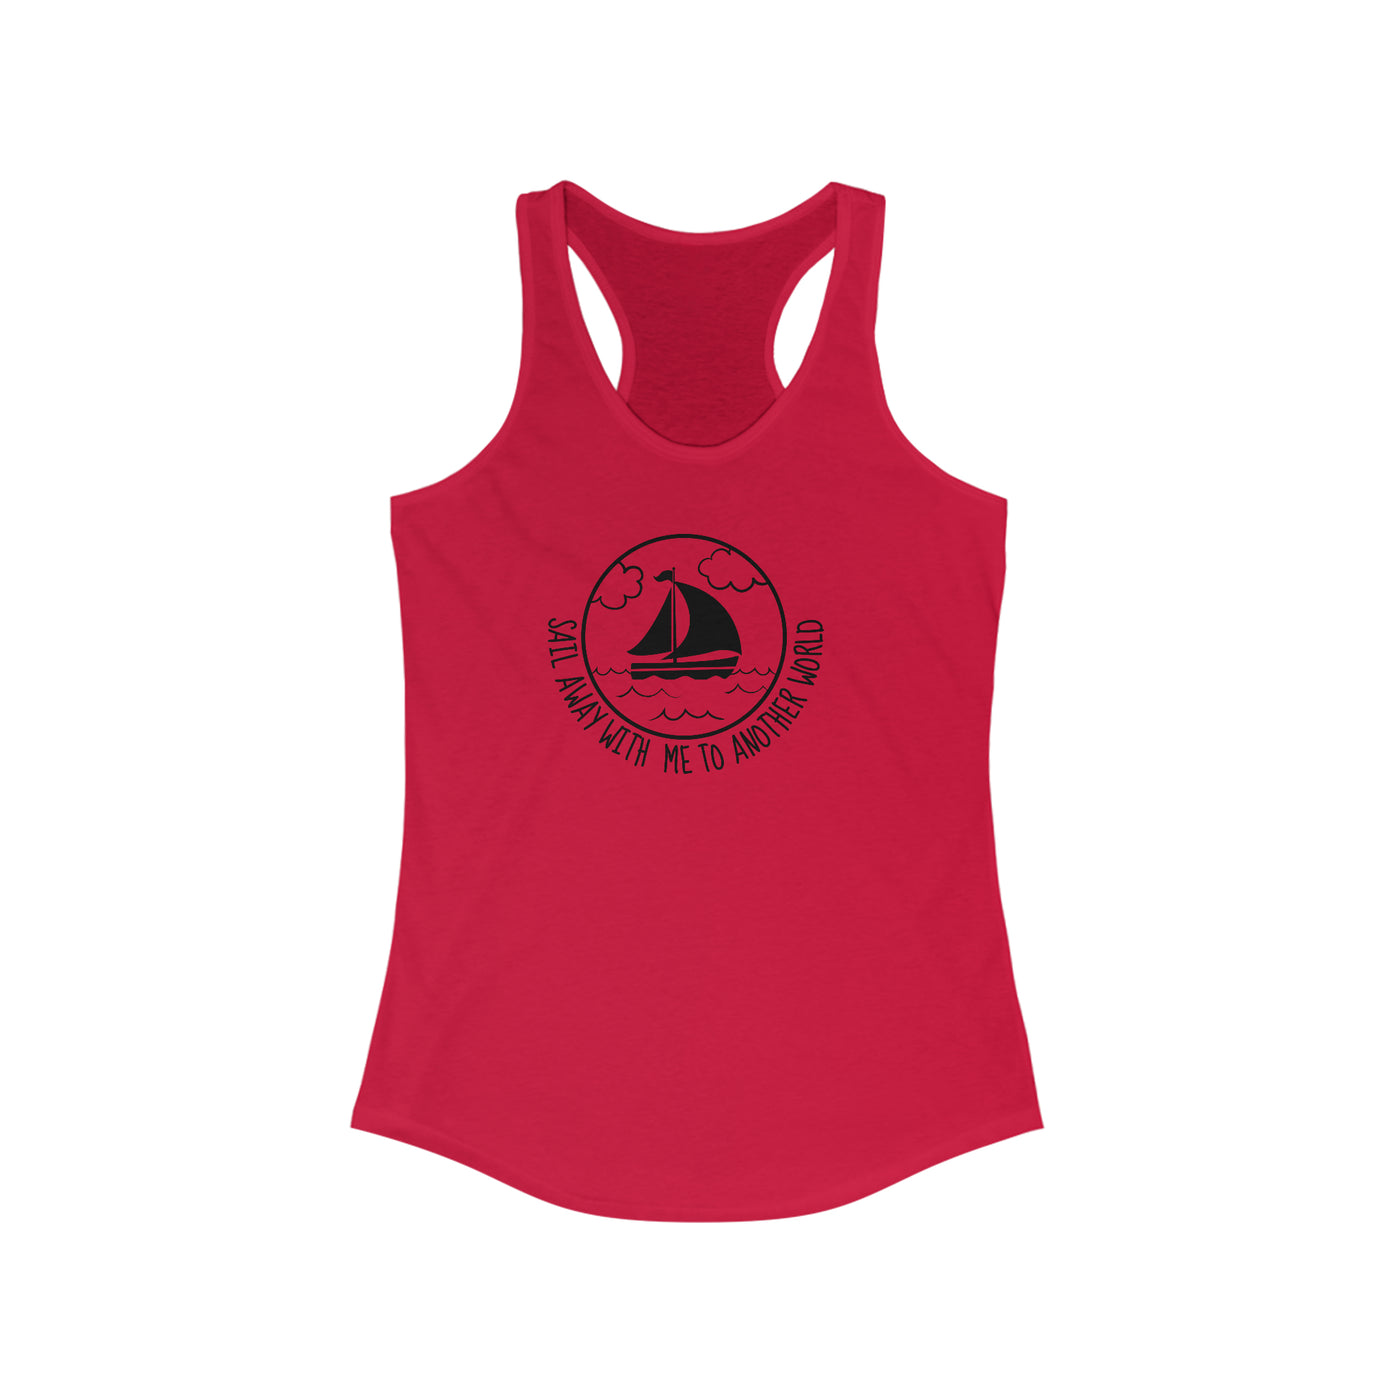 Sailsail Away with Me to Another World - Women's Tank Top - letstravel